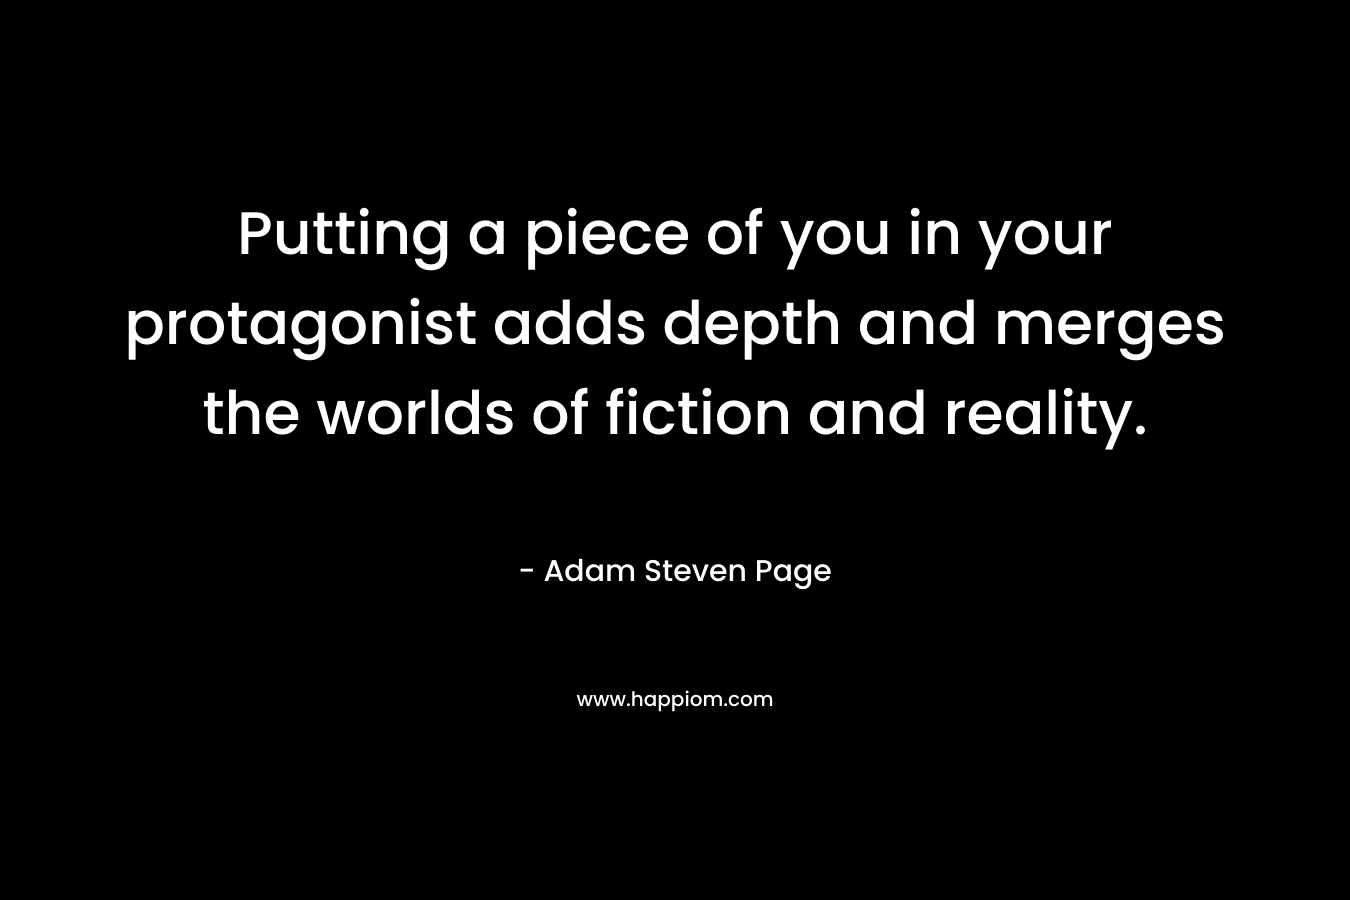 Putting a piece of you in your protagonist adds depth and merges the worlds of fiction and reality. – Adam Steven Page